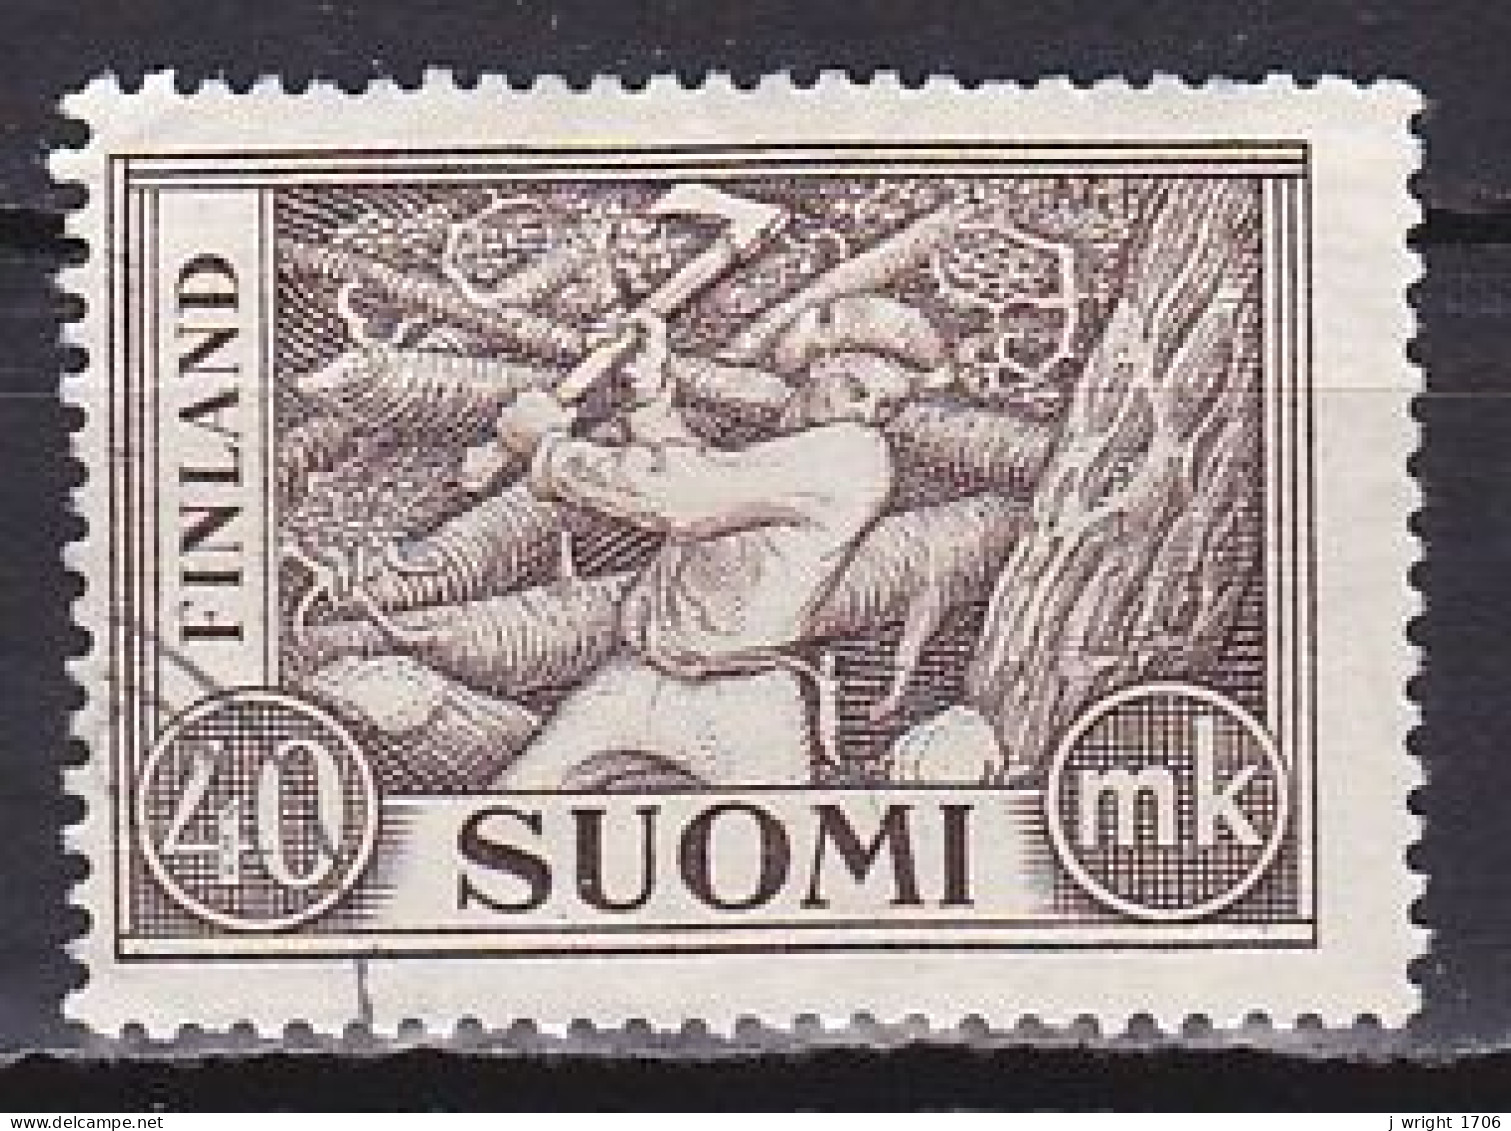 Finland, 1952, Wood Cutter, 40mk, USED - Used Stamps